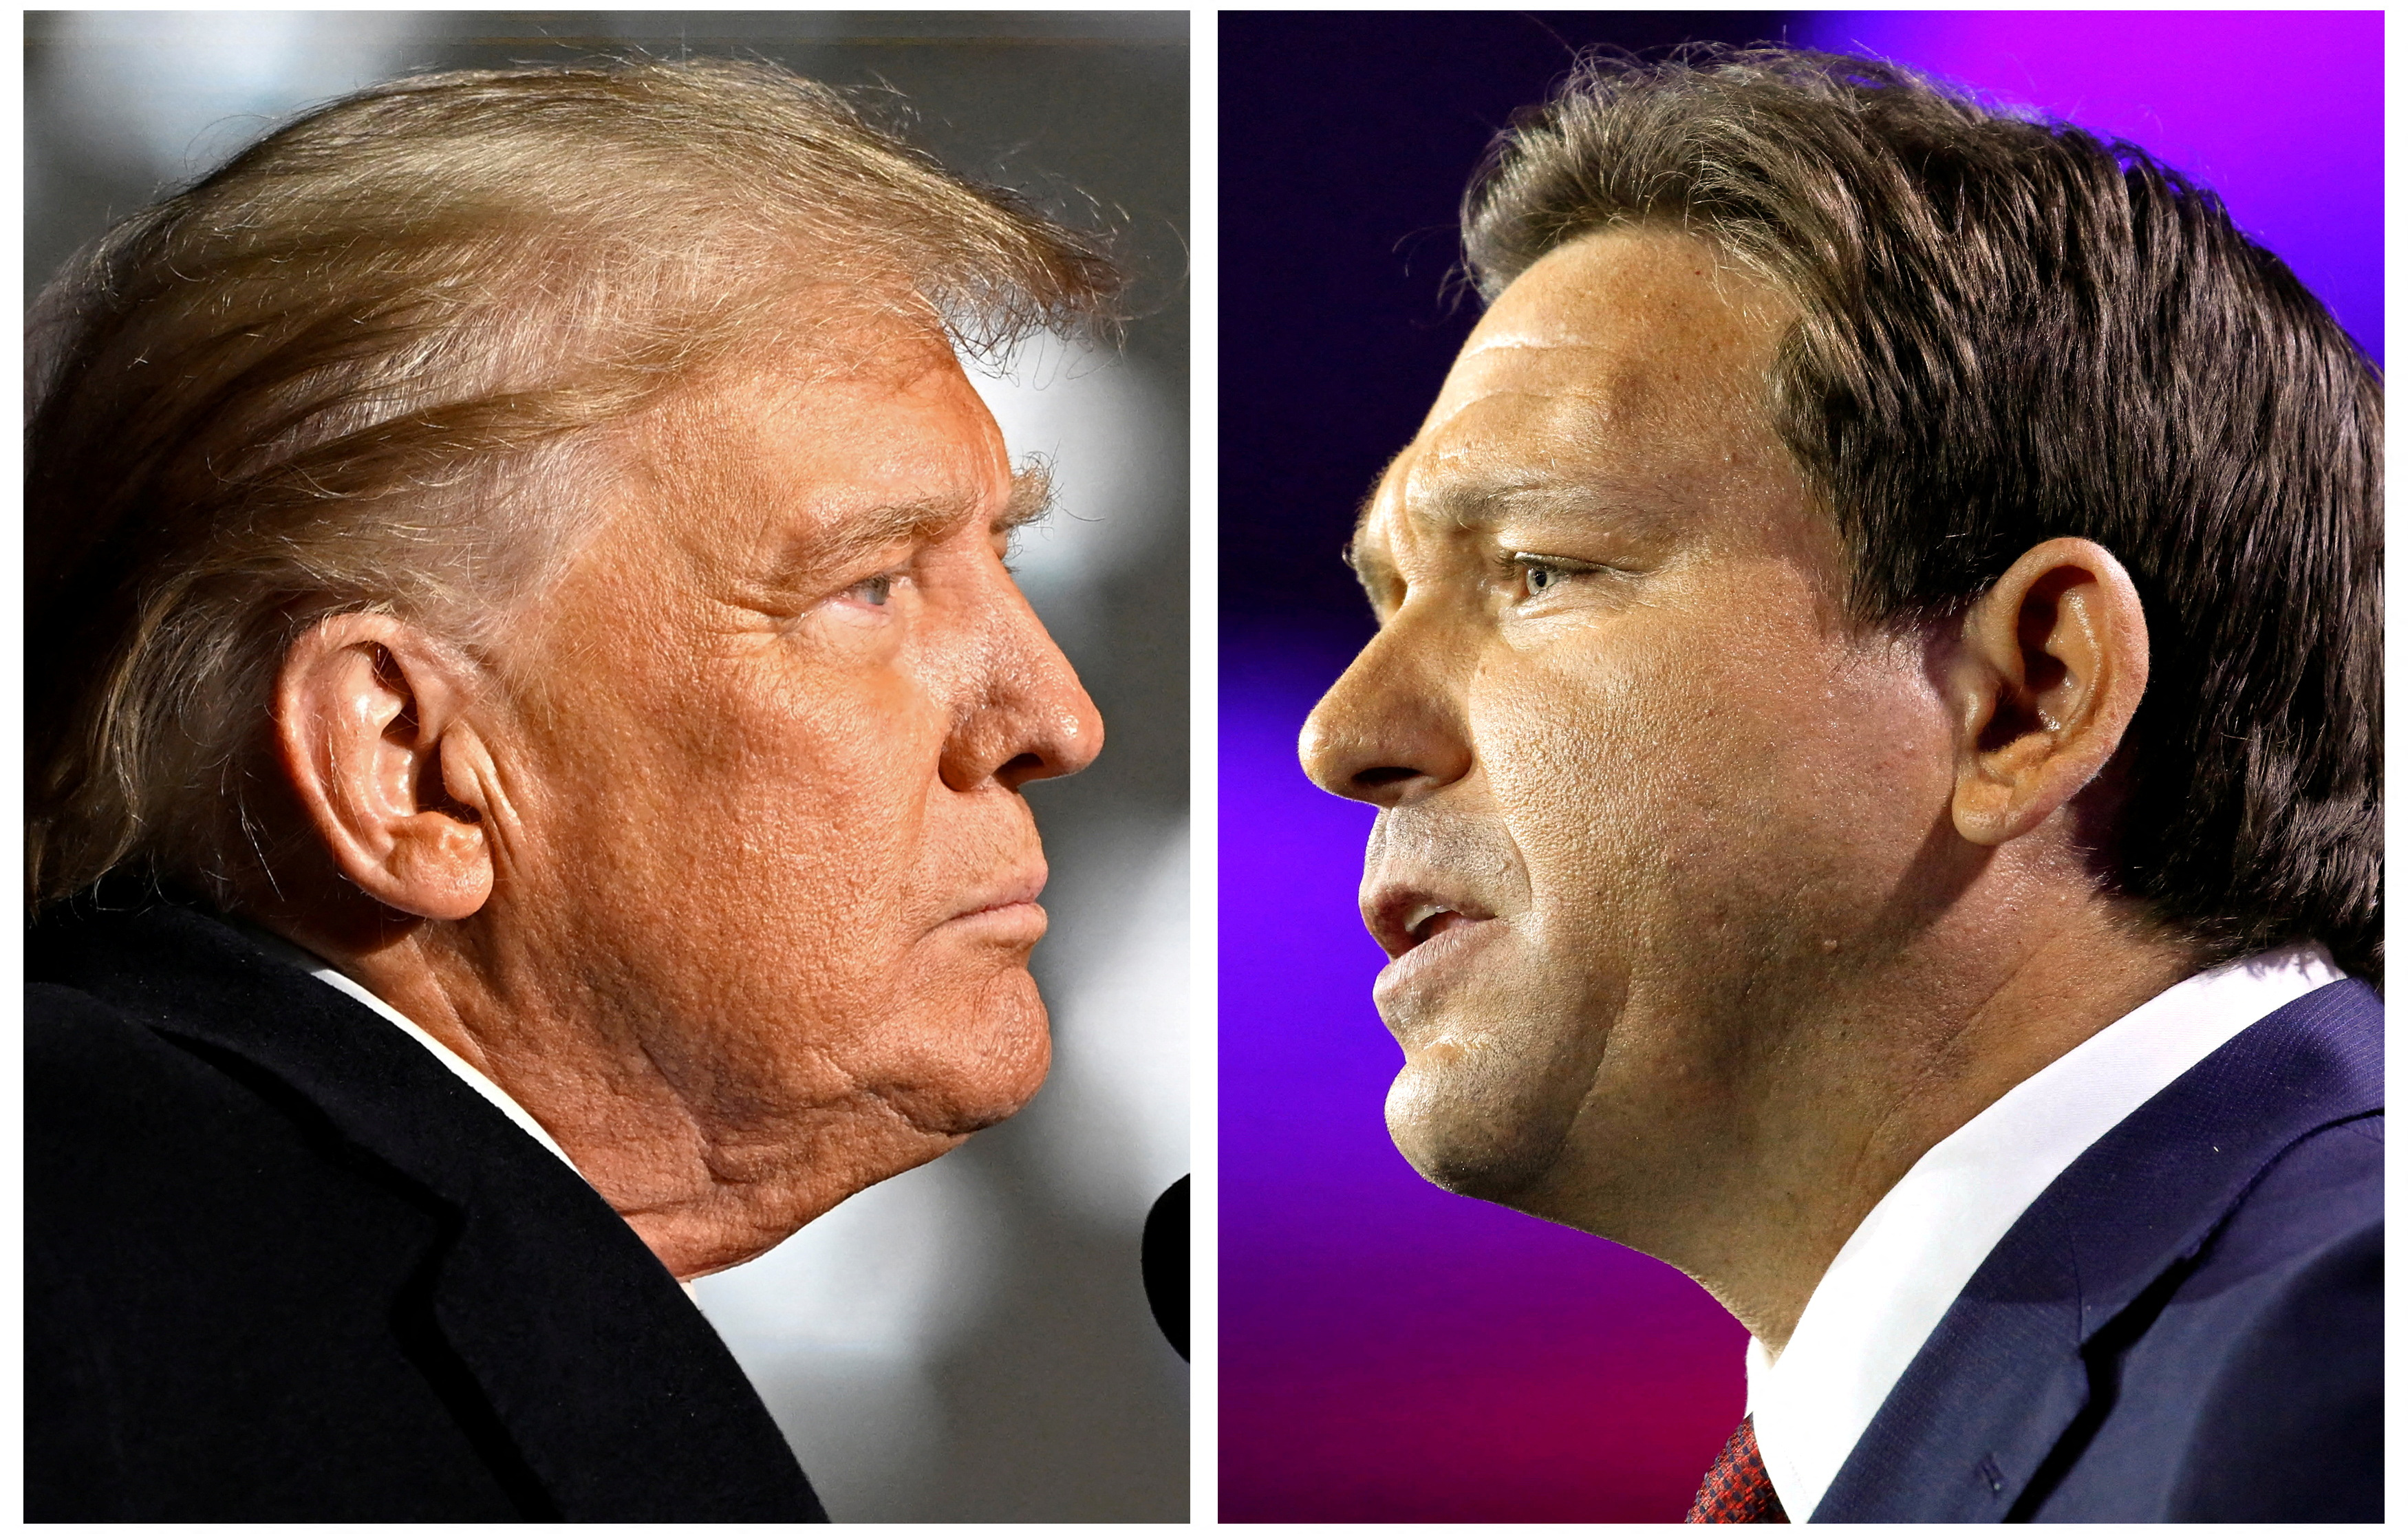 Trump attacked the governor of Florida, Ron DeSantis, accusing him of being disloyal, after the southern politician was gaining support among the conservative media as a possible electoral candidate for the 2024 presidential election. (REUTERS)